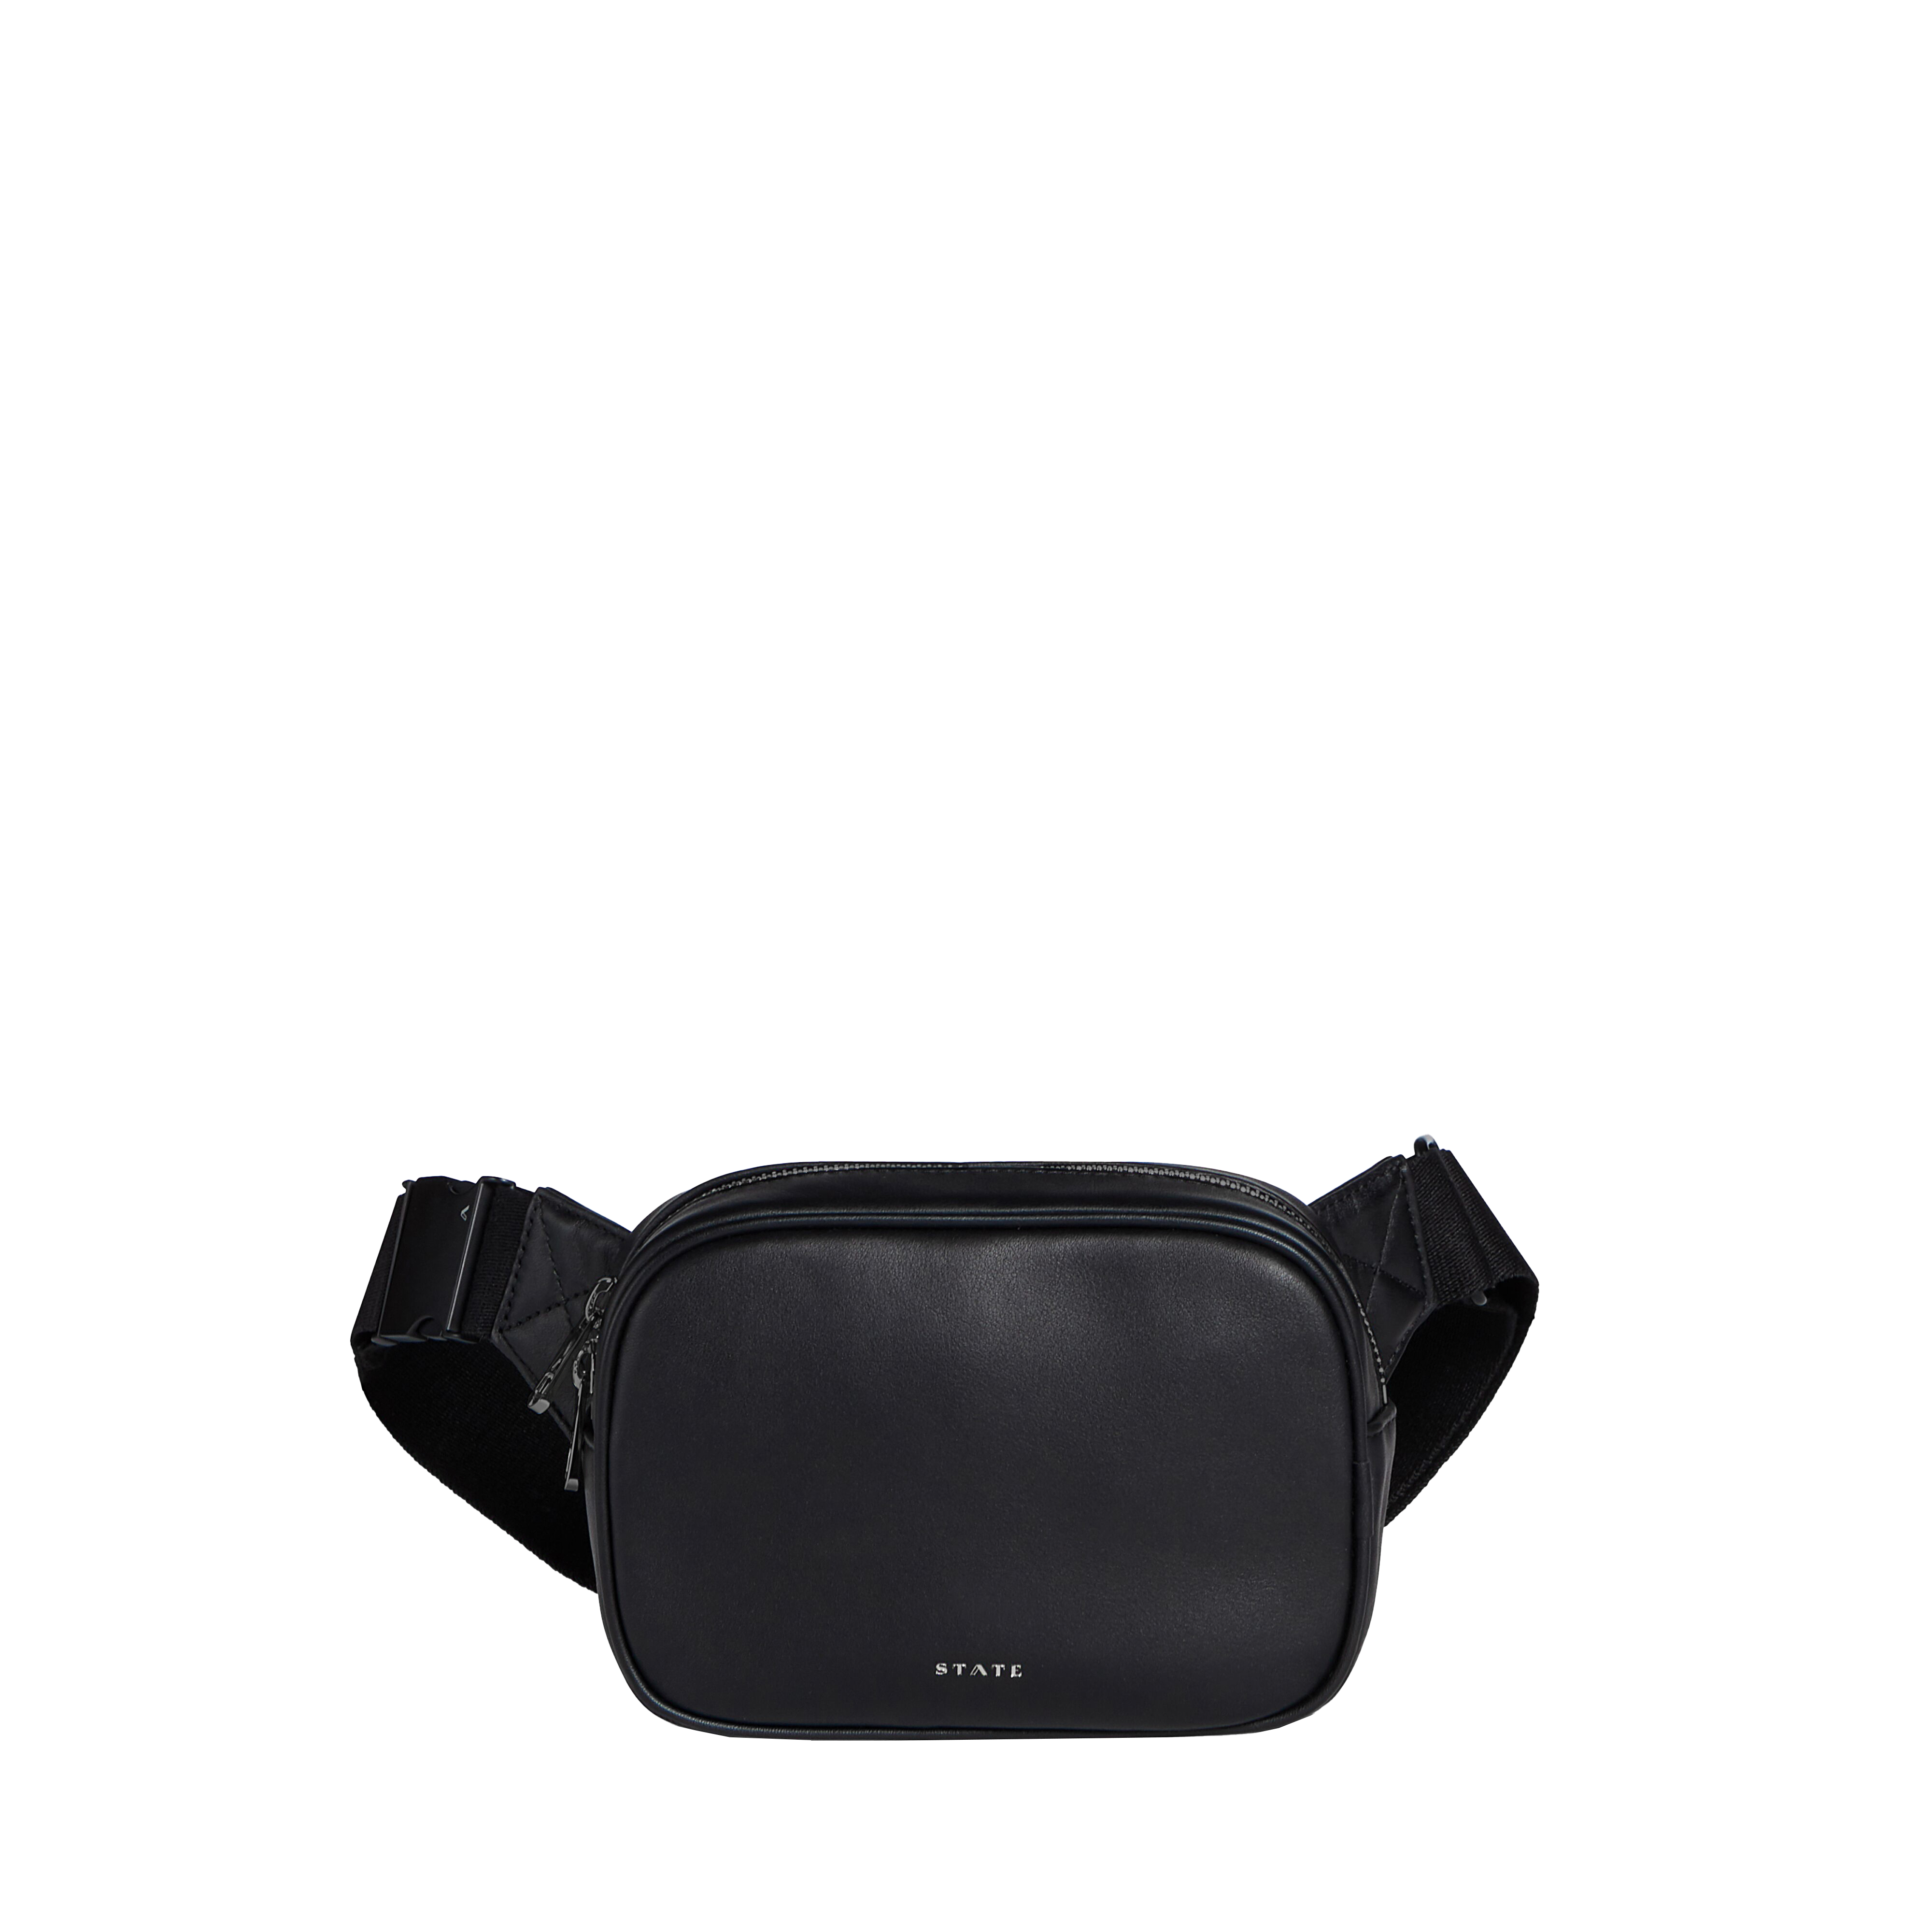 State Bags Bennett Fanny Pack Smooth Leather Black Black / Standard